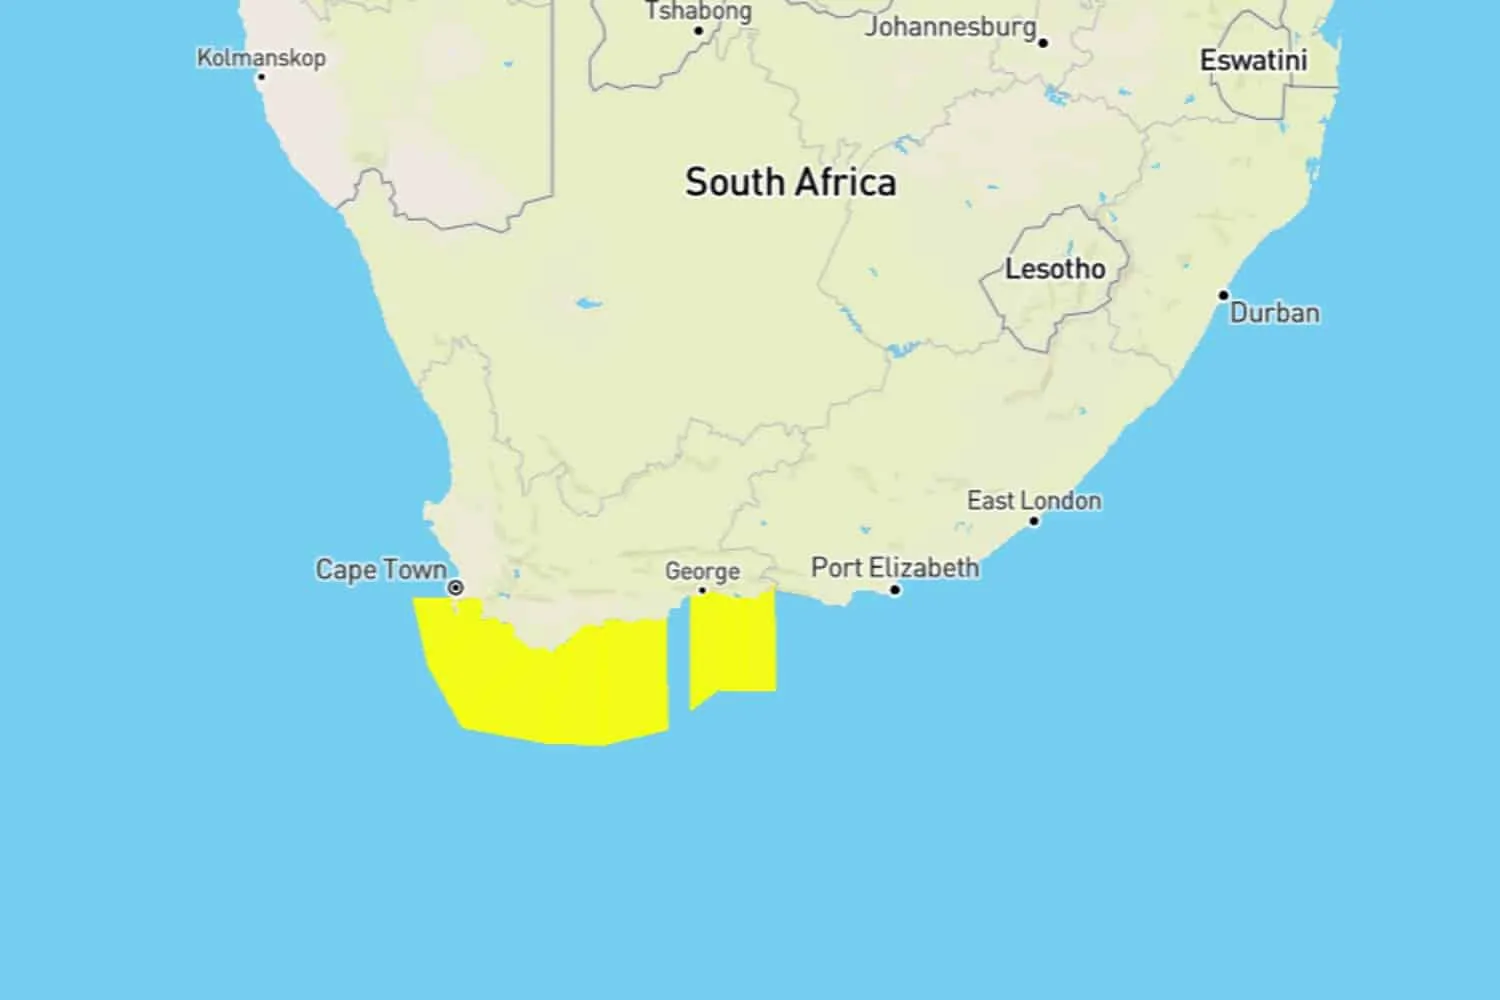 [WEATHER WARNING]: Disruptive Waves Around Cape Town and Cape Agulhas